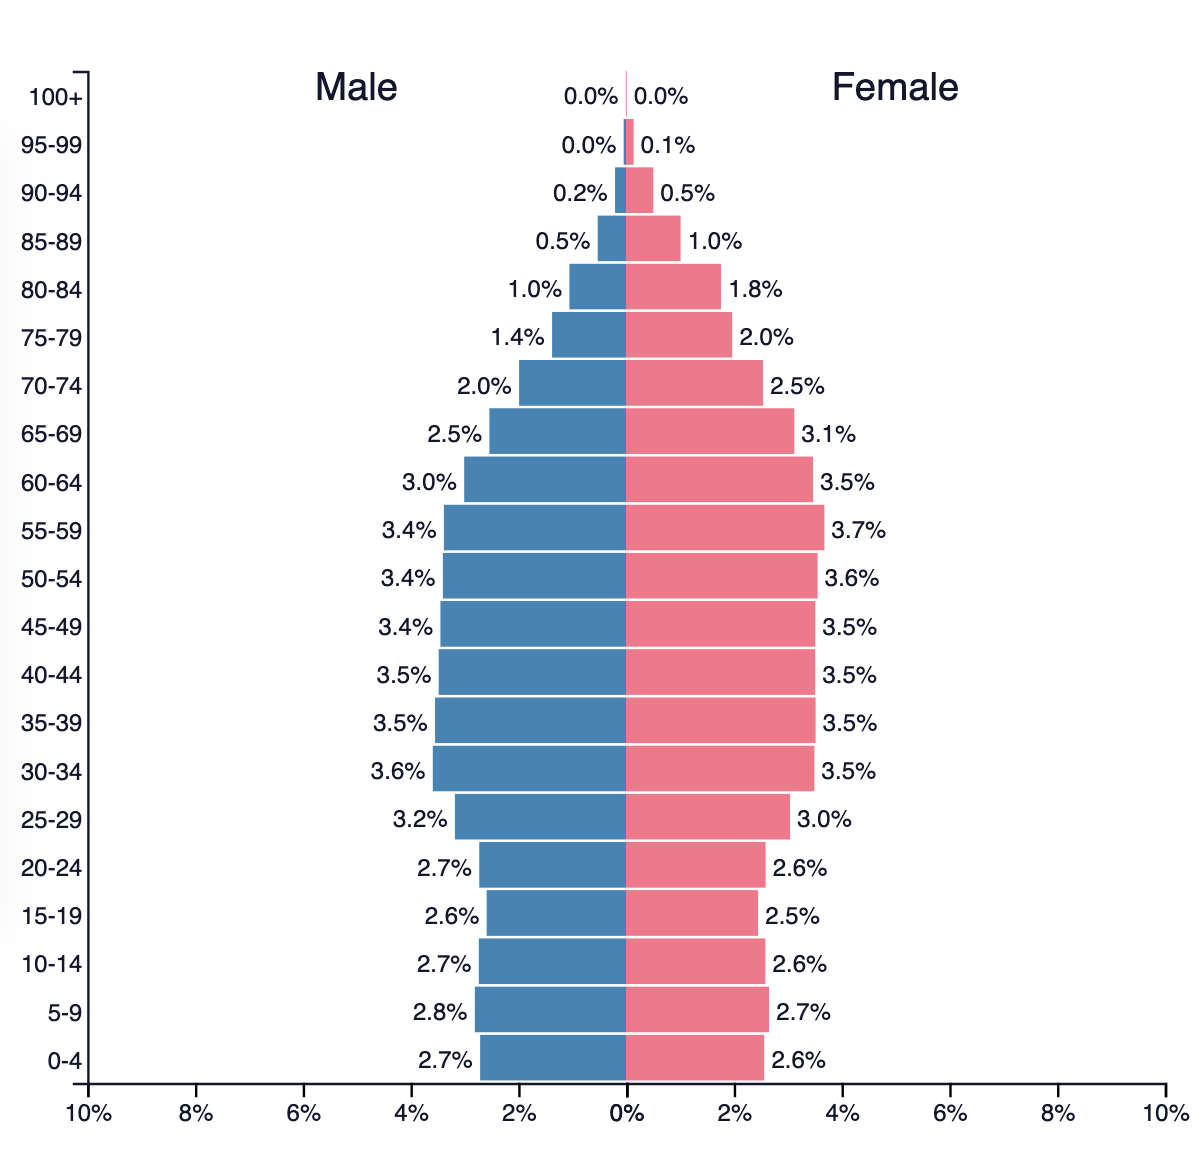 Age pyramid showing differences between man and women in Europe